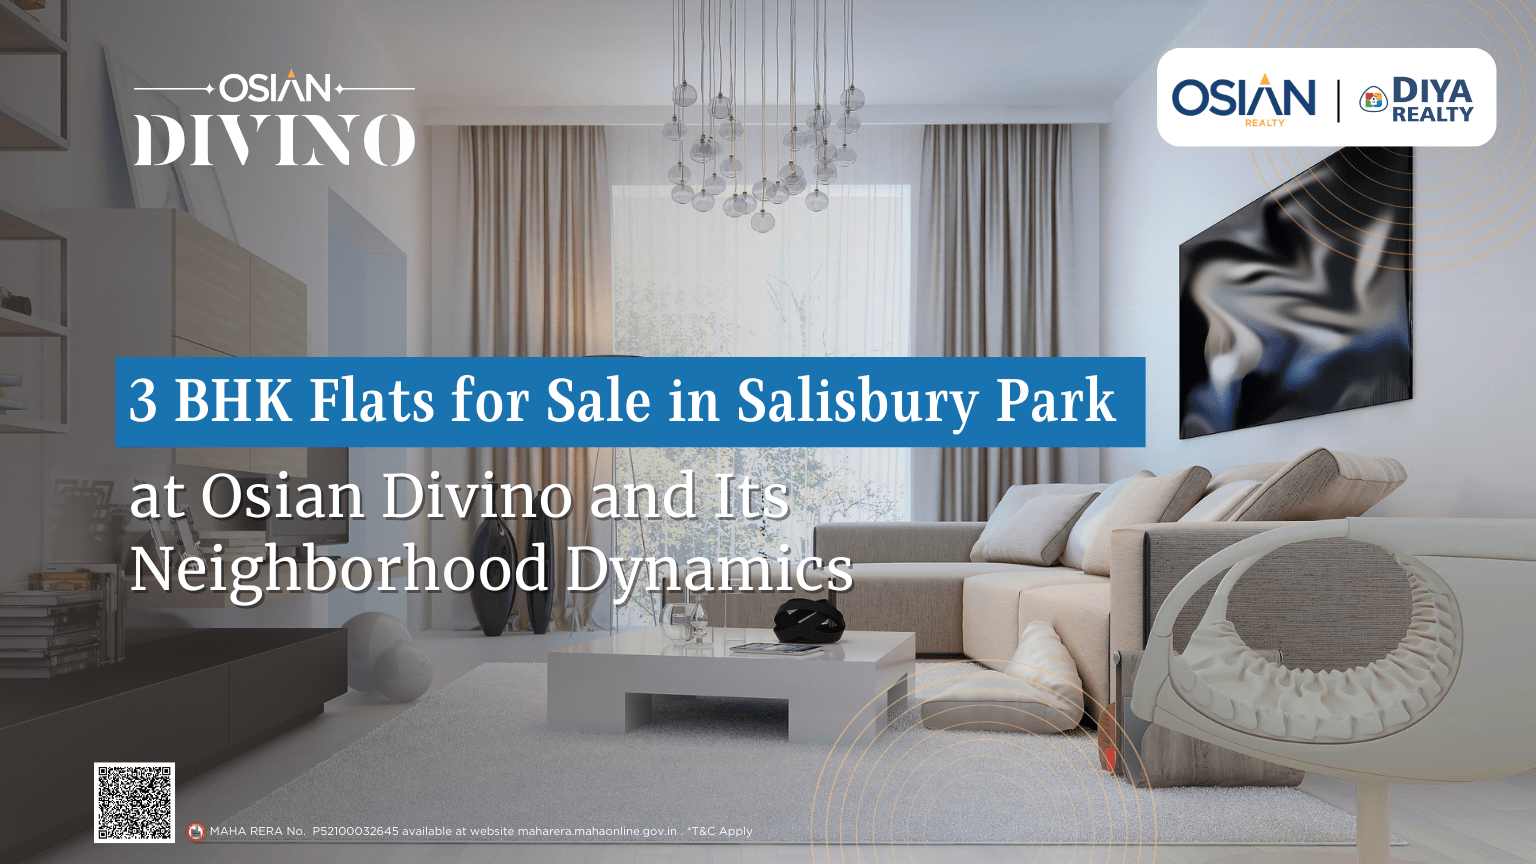 3 BHK Flats for Sale in Salisbury Park at Osian Divino and Its Neighborhood Dynamics